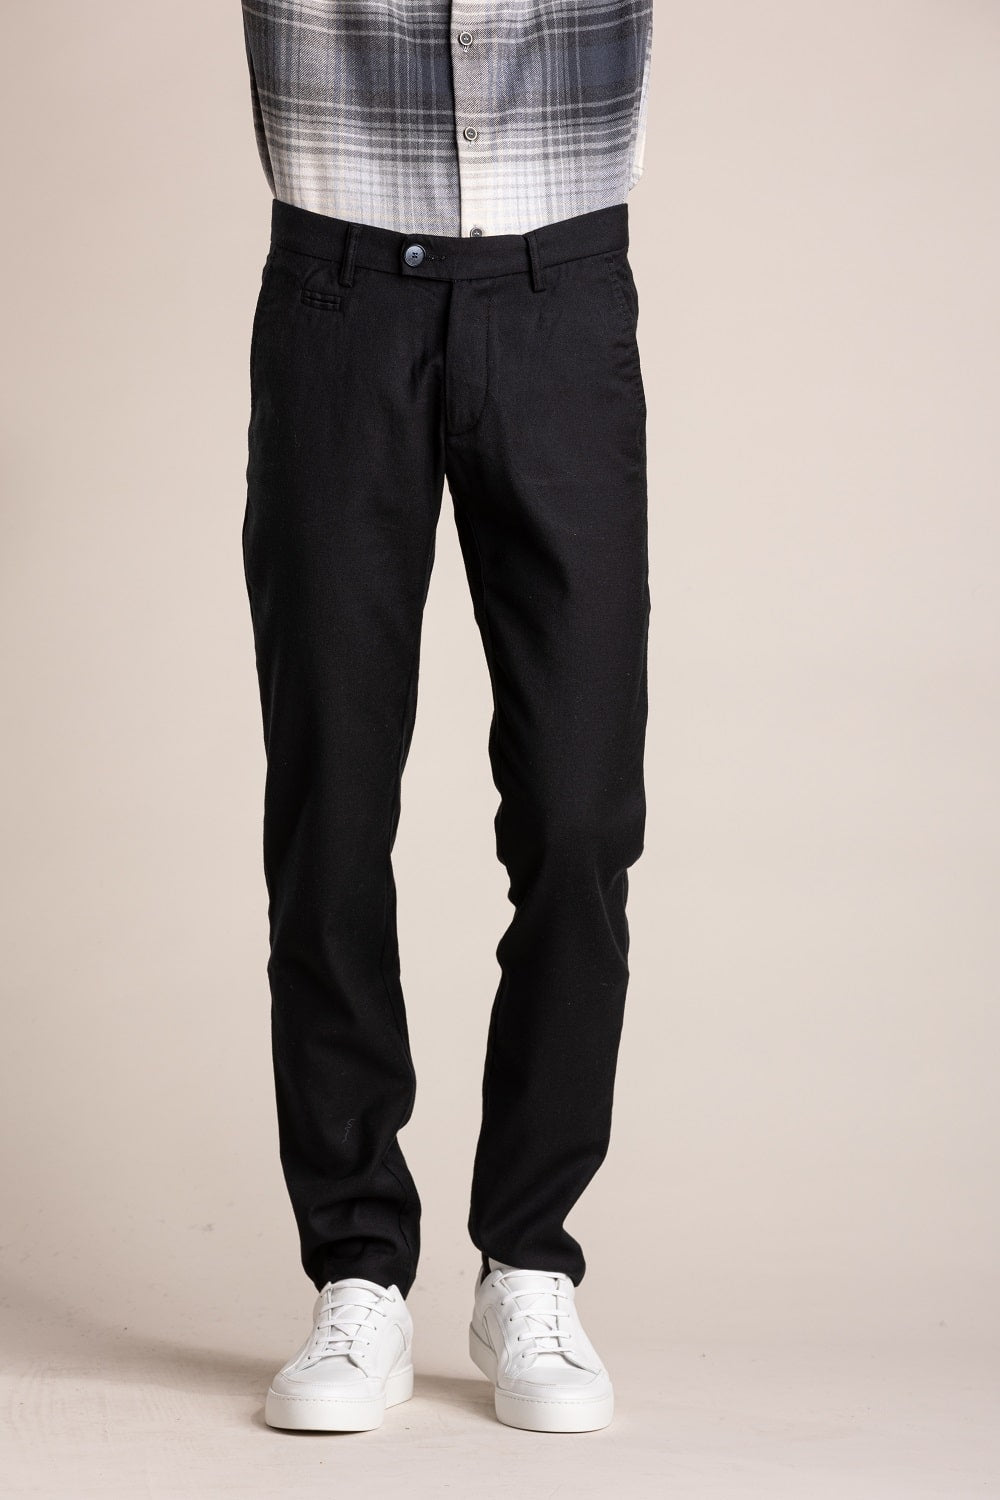 Black stretch wool cotton city trousers